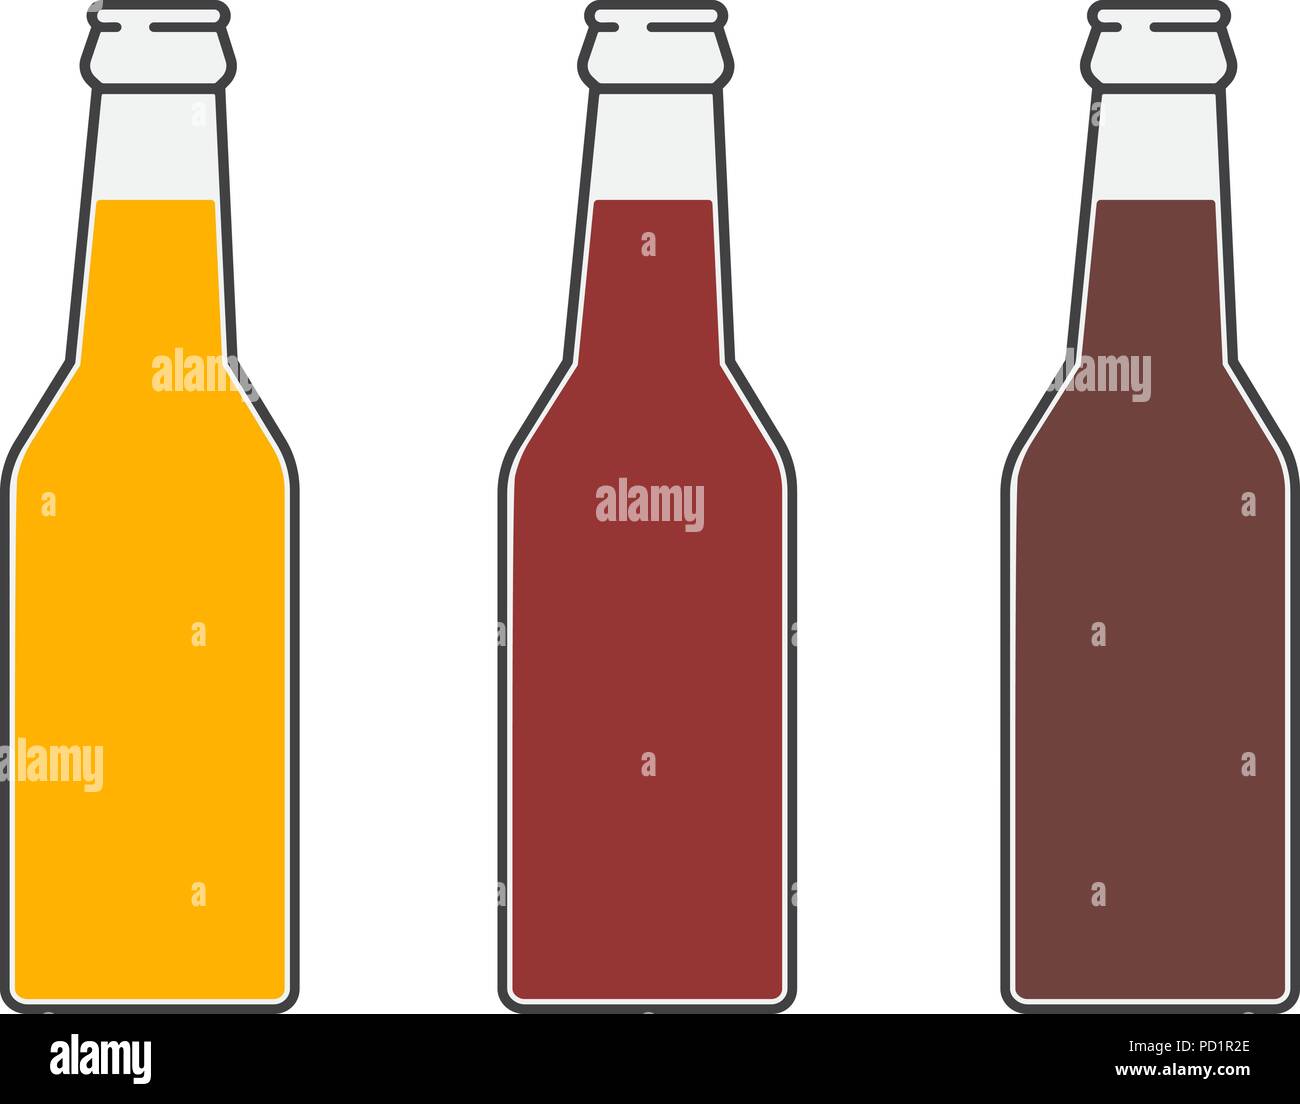 Bottles of beer. Three versions light beer, dark beer and amber beer. Isolated vector illustration on white background. Stock Vector